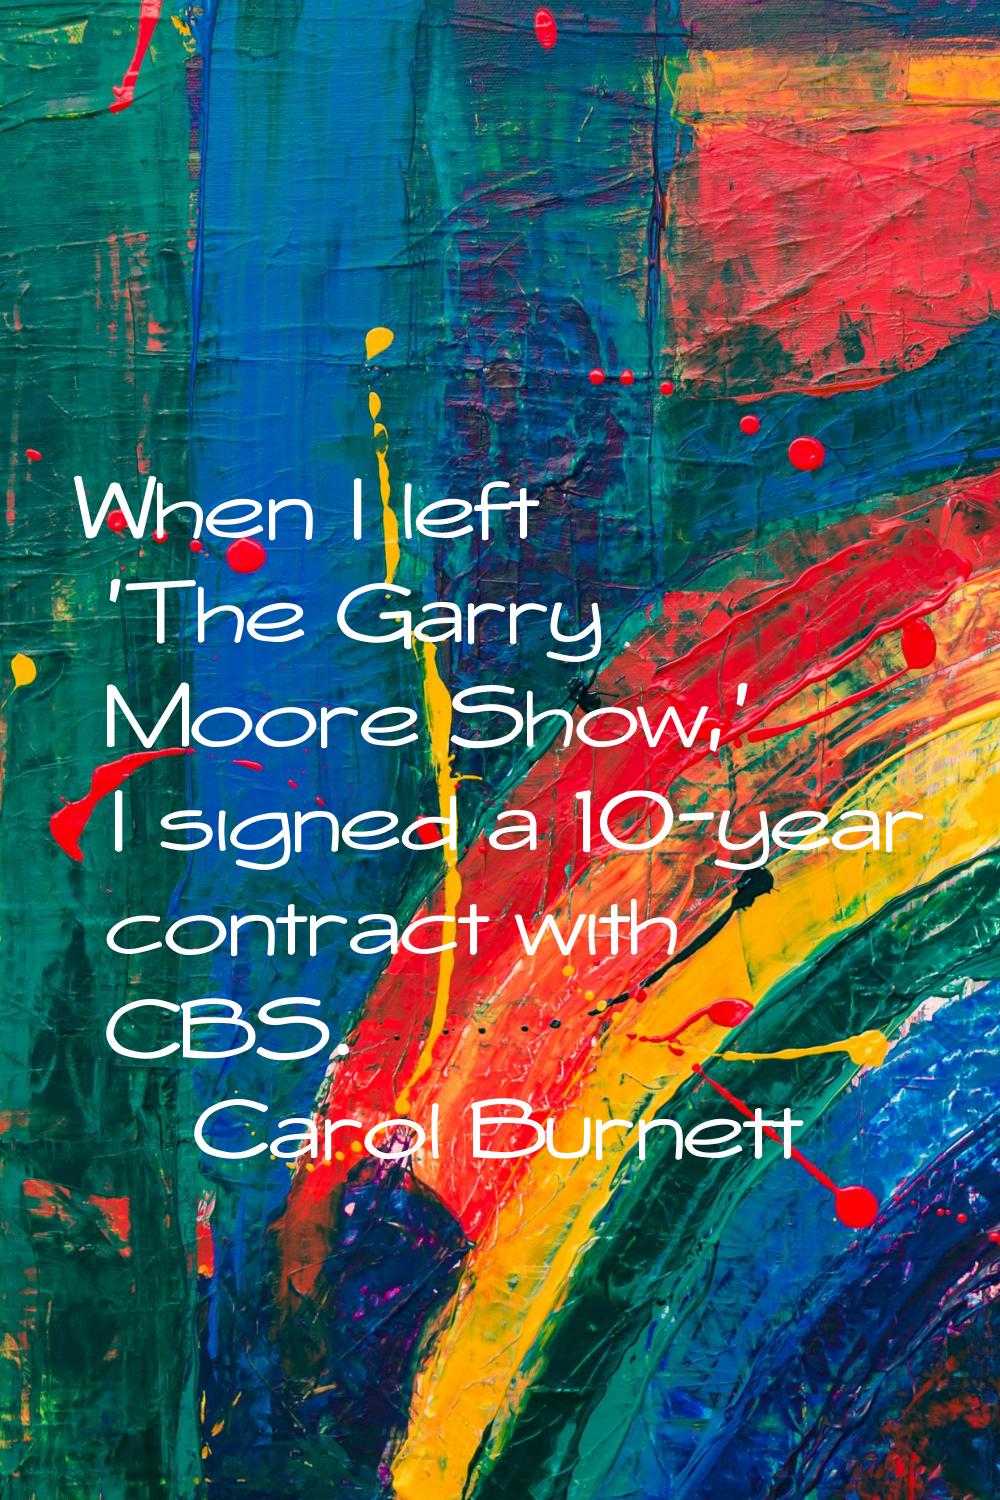 When I left 'The Garry Moore Show,' I signed a 10-year contract with CBS.